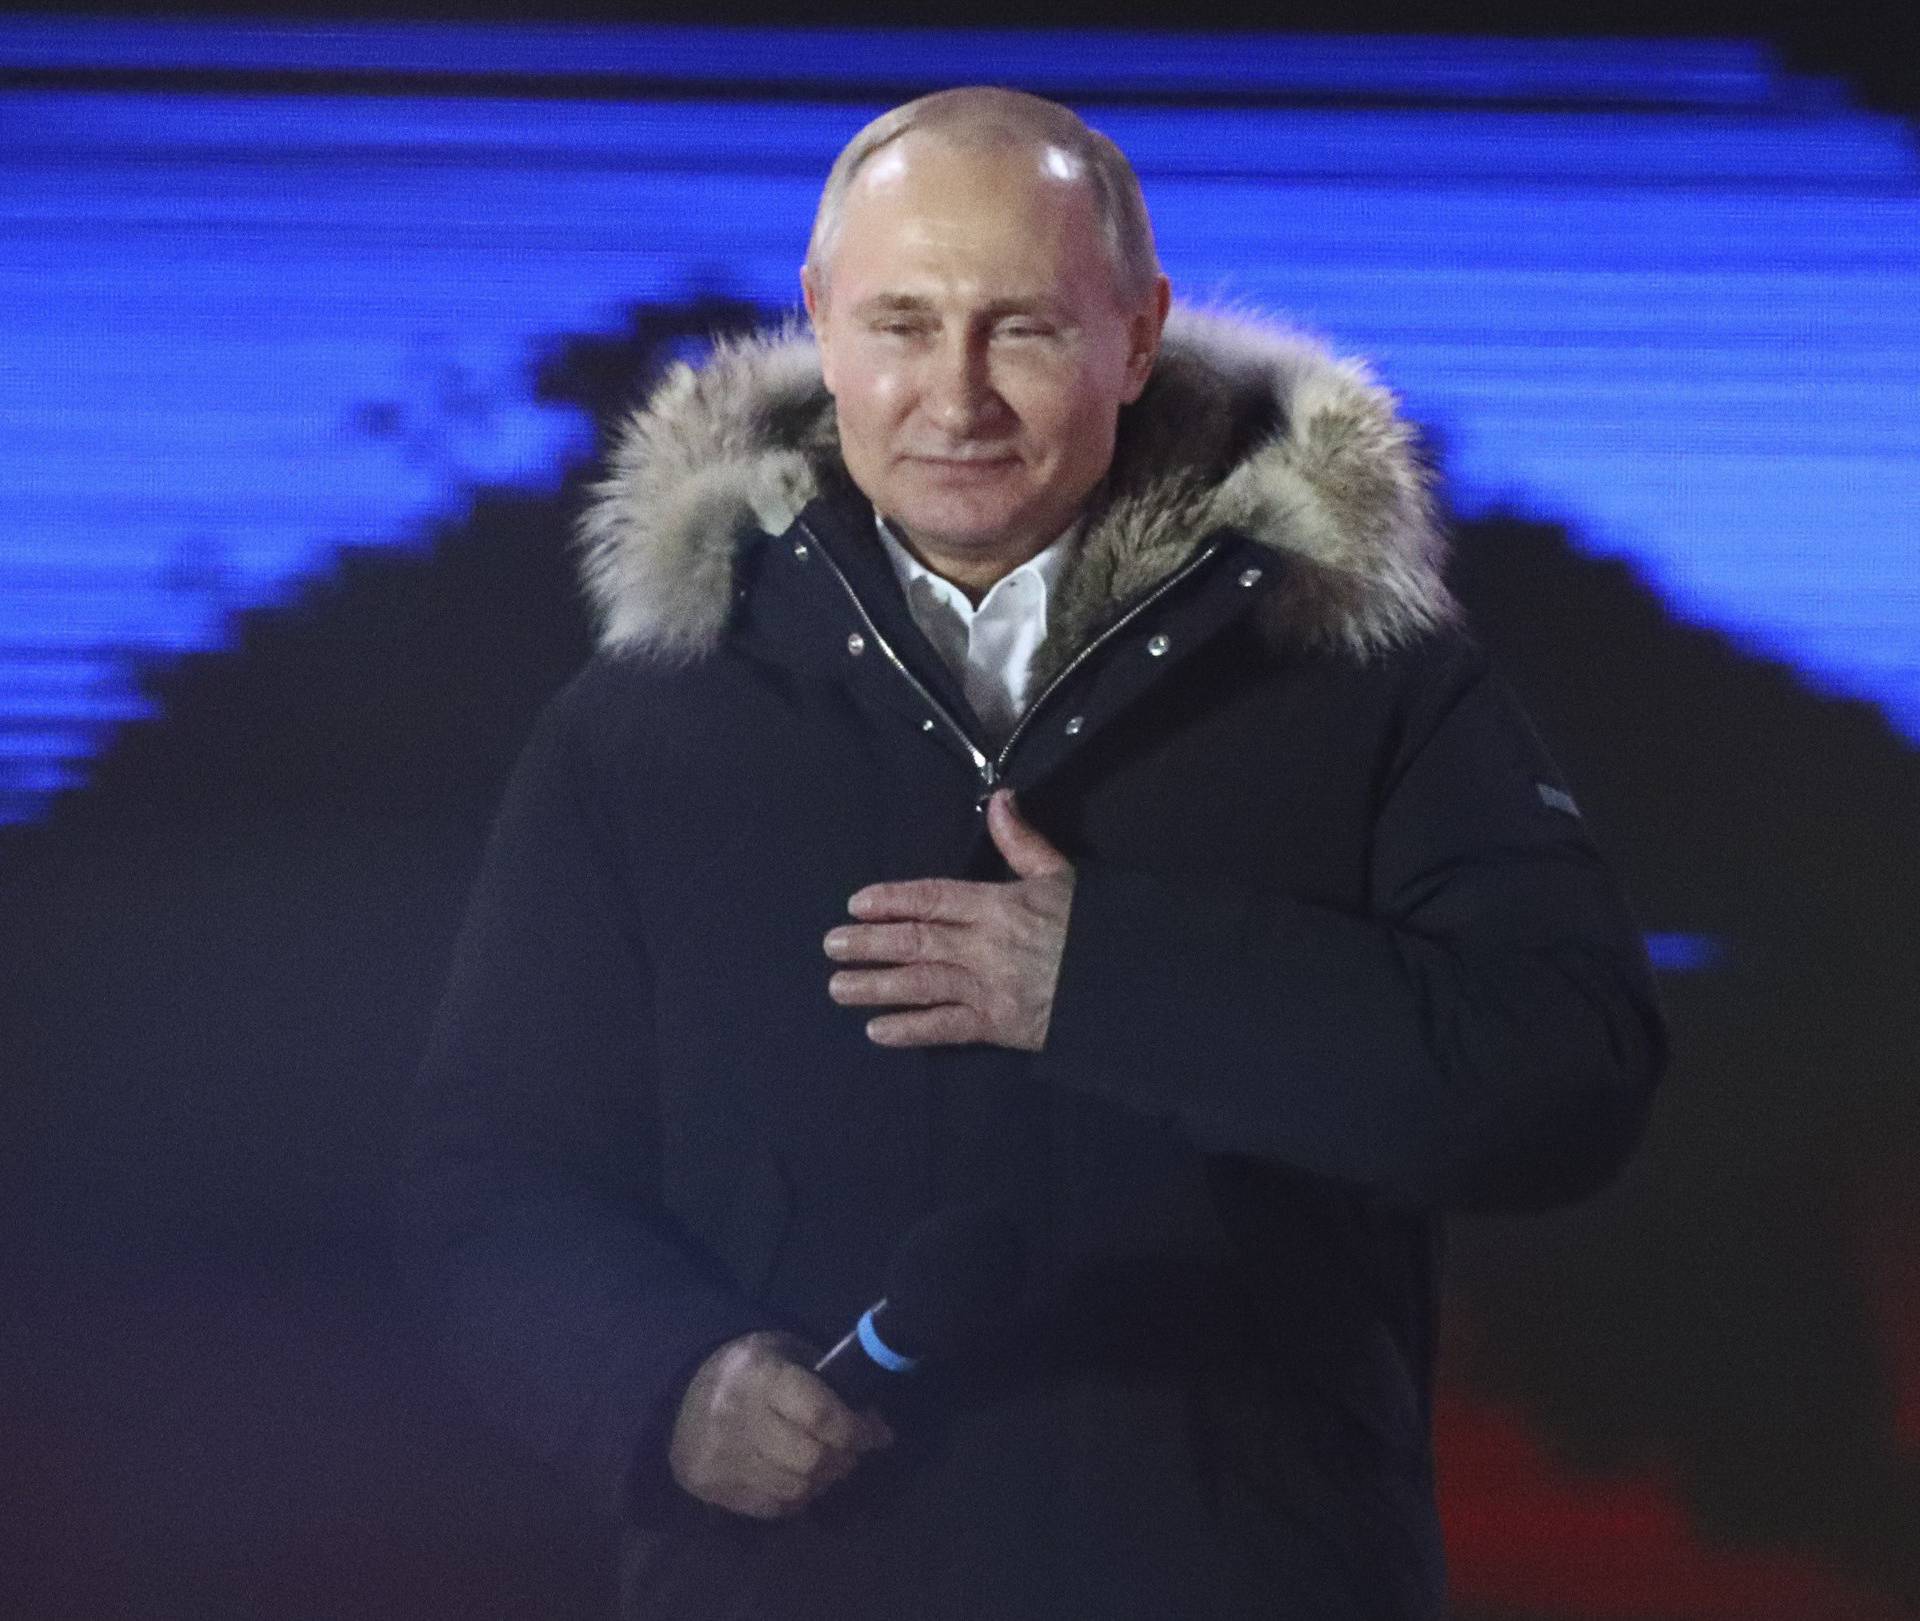 Russian President and Presidential candidate Putin attends a rally and concert marking the fourth anniversary of Russia's annexation of the Crimea region, in Moscow